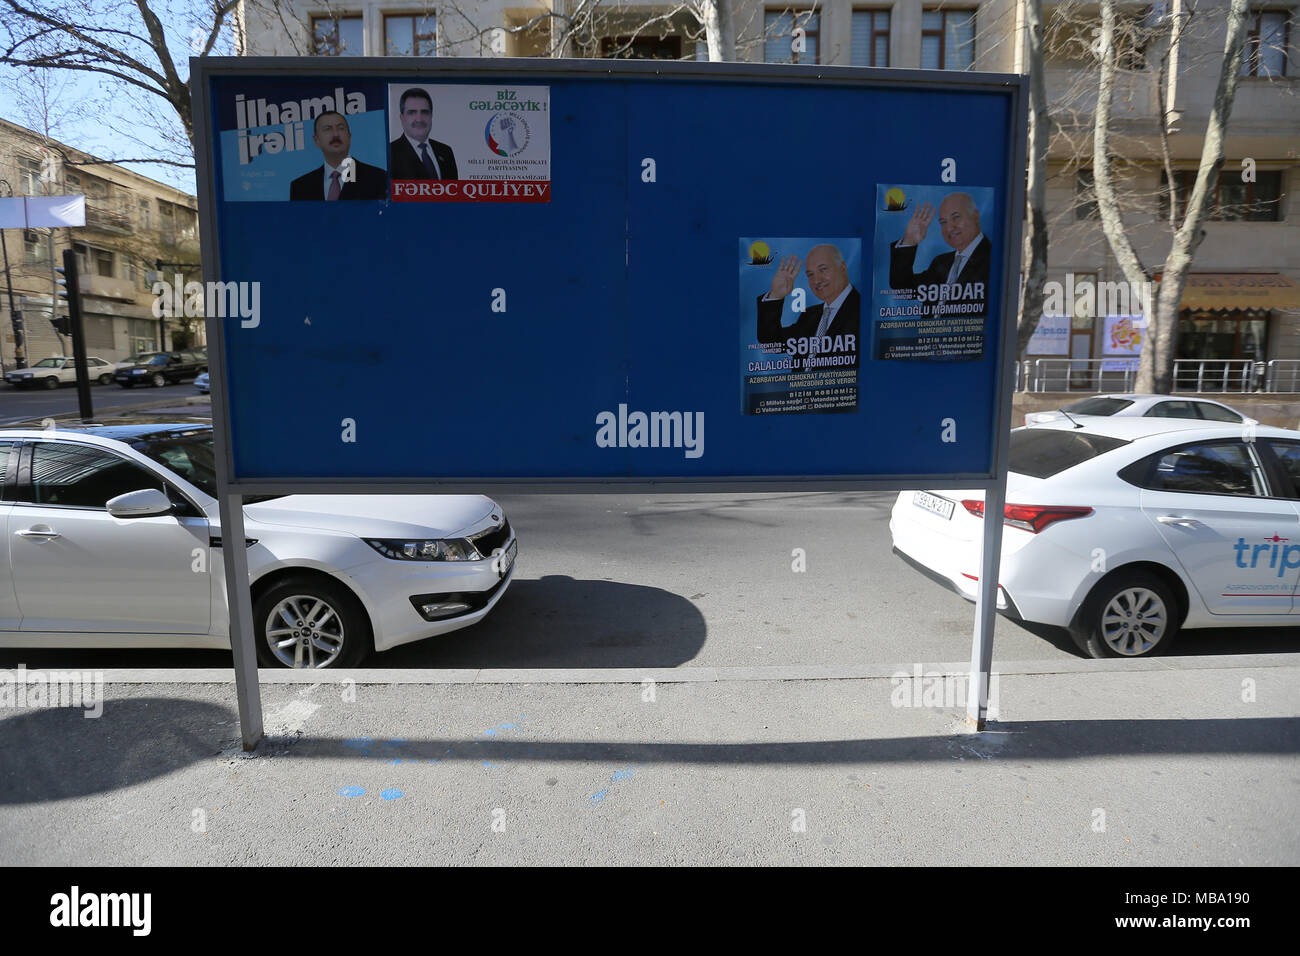 Election campaign posters promoting incumbent president Ilham Aliyev, presidential and other presidential candidates; Azerbaijan is to hold a presidential election 11 April 2018. Credit: Aziz Karimov/Alamy Live News Stock Photo